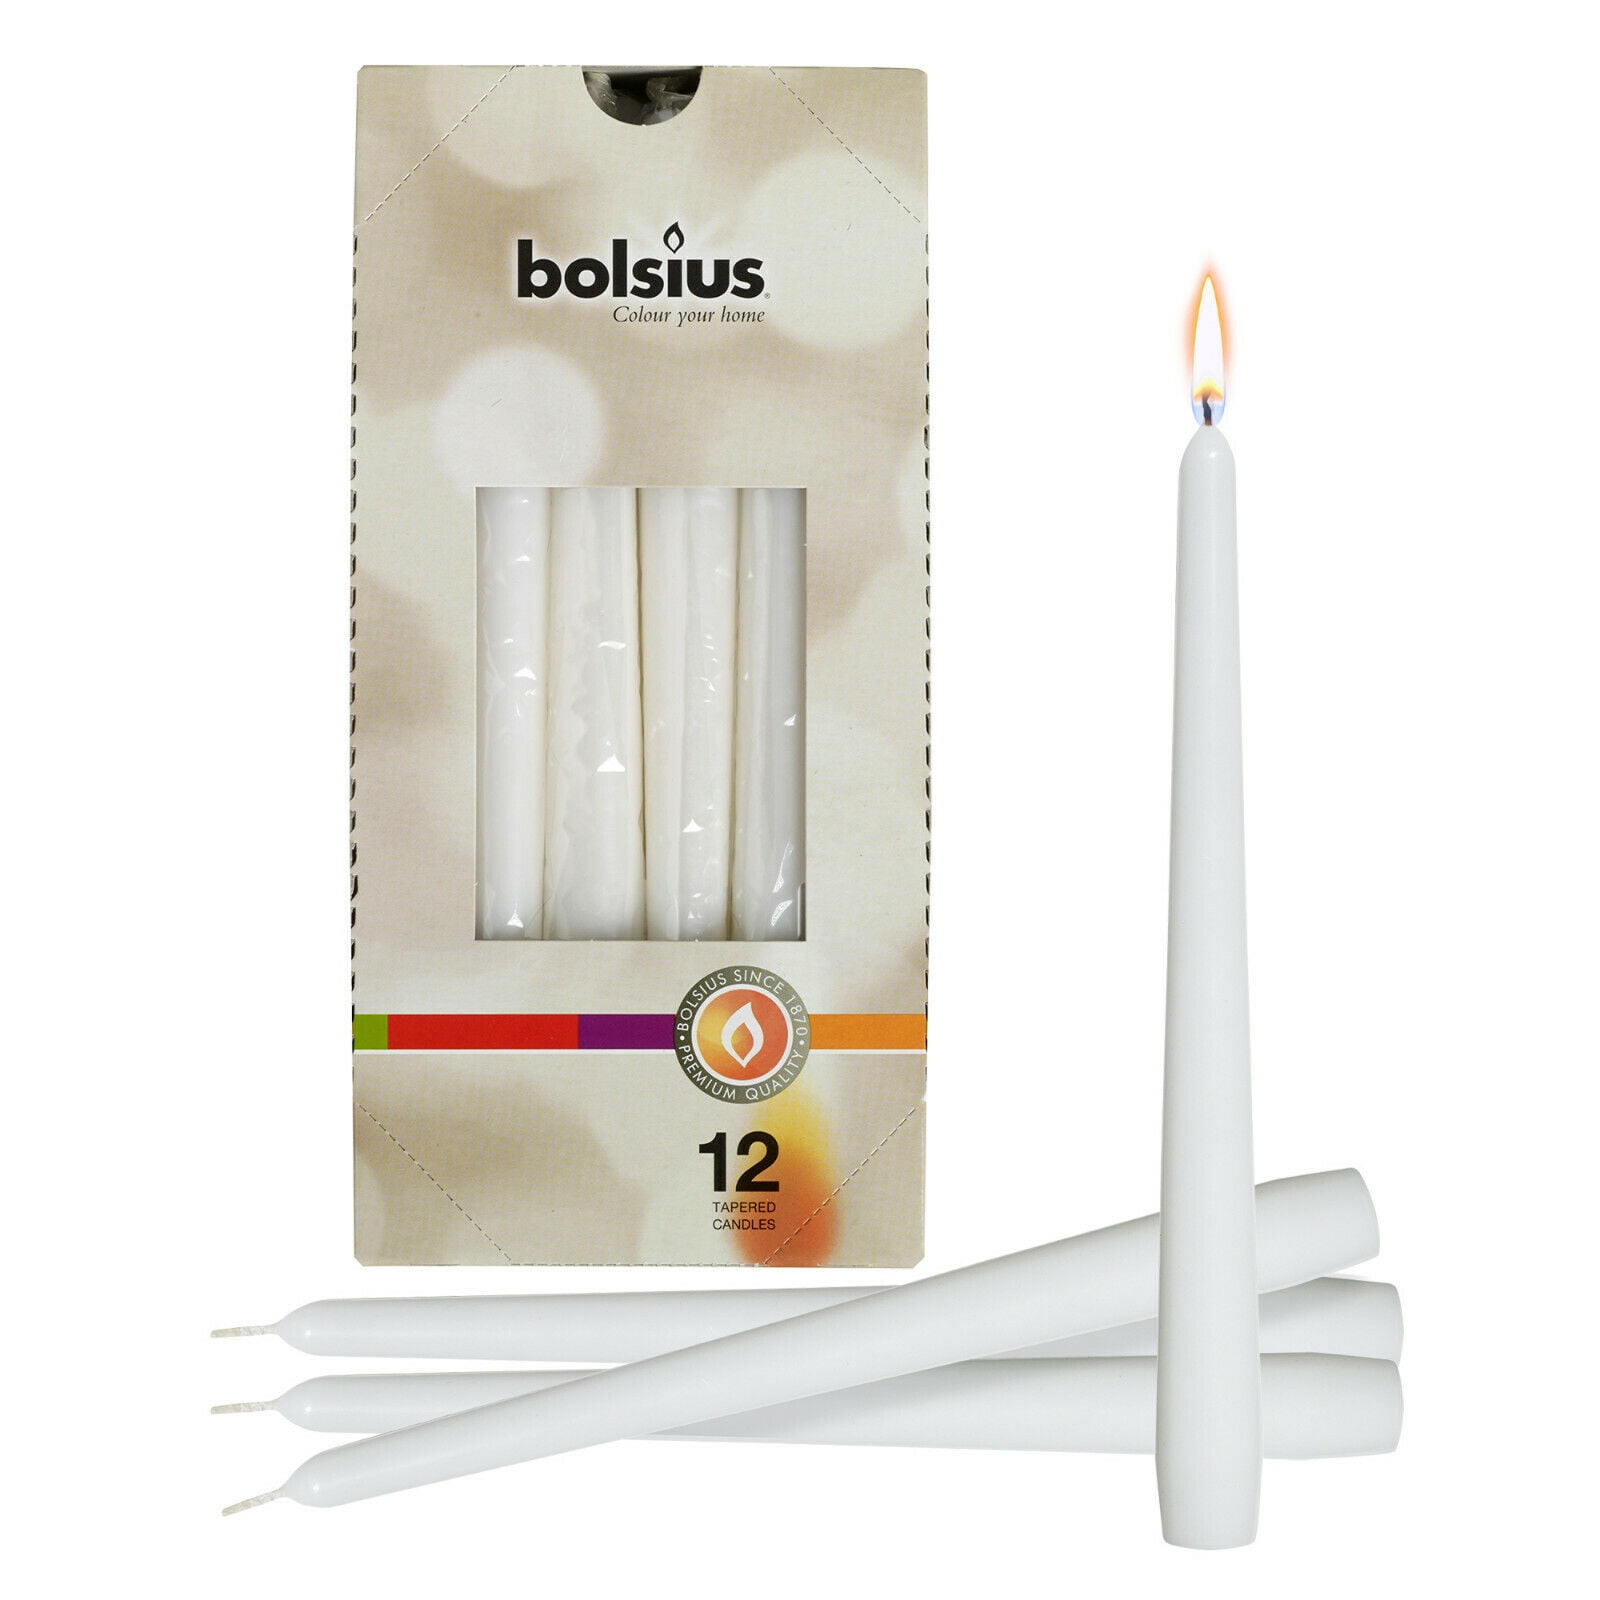 Wedding BOLSIUS Long Household Silver Taper Candles 10-inch Unscented Premium Quality Wax Parties and Special Occasions 7.5 Hour Long Burning Dripless Candles Bulk Pack of 12 for Home Decor